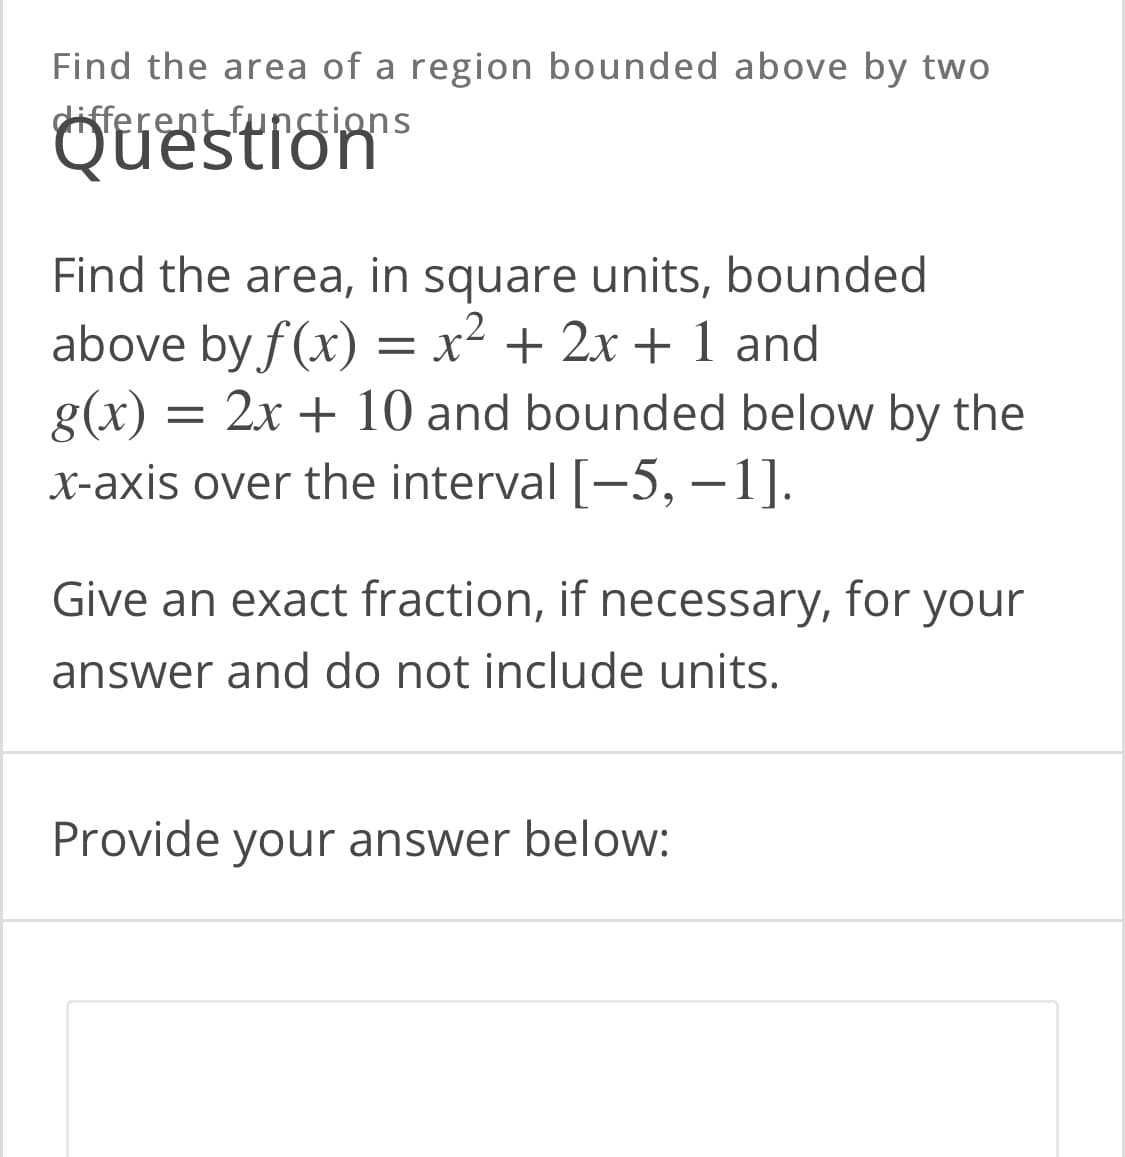 Find the area of a region bounded above by two
Questrom
different functions
Find the area, in square units, bounded
above by f(x) = x² + 2x + 1 and
g(x) = 2x + 10 and bounded below by the
X-axis over the interval [-5, –1].
Give an exact fraction, if necessary, for your
answer and do not include units.
Provide your answer below:
